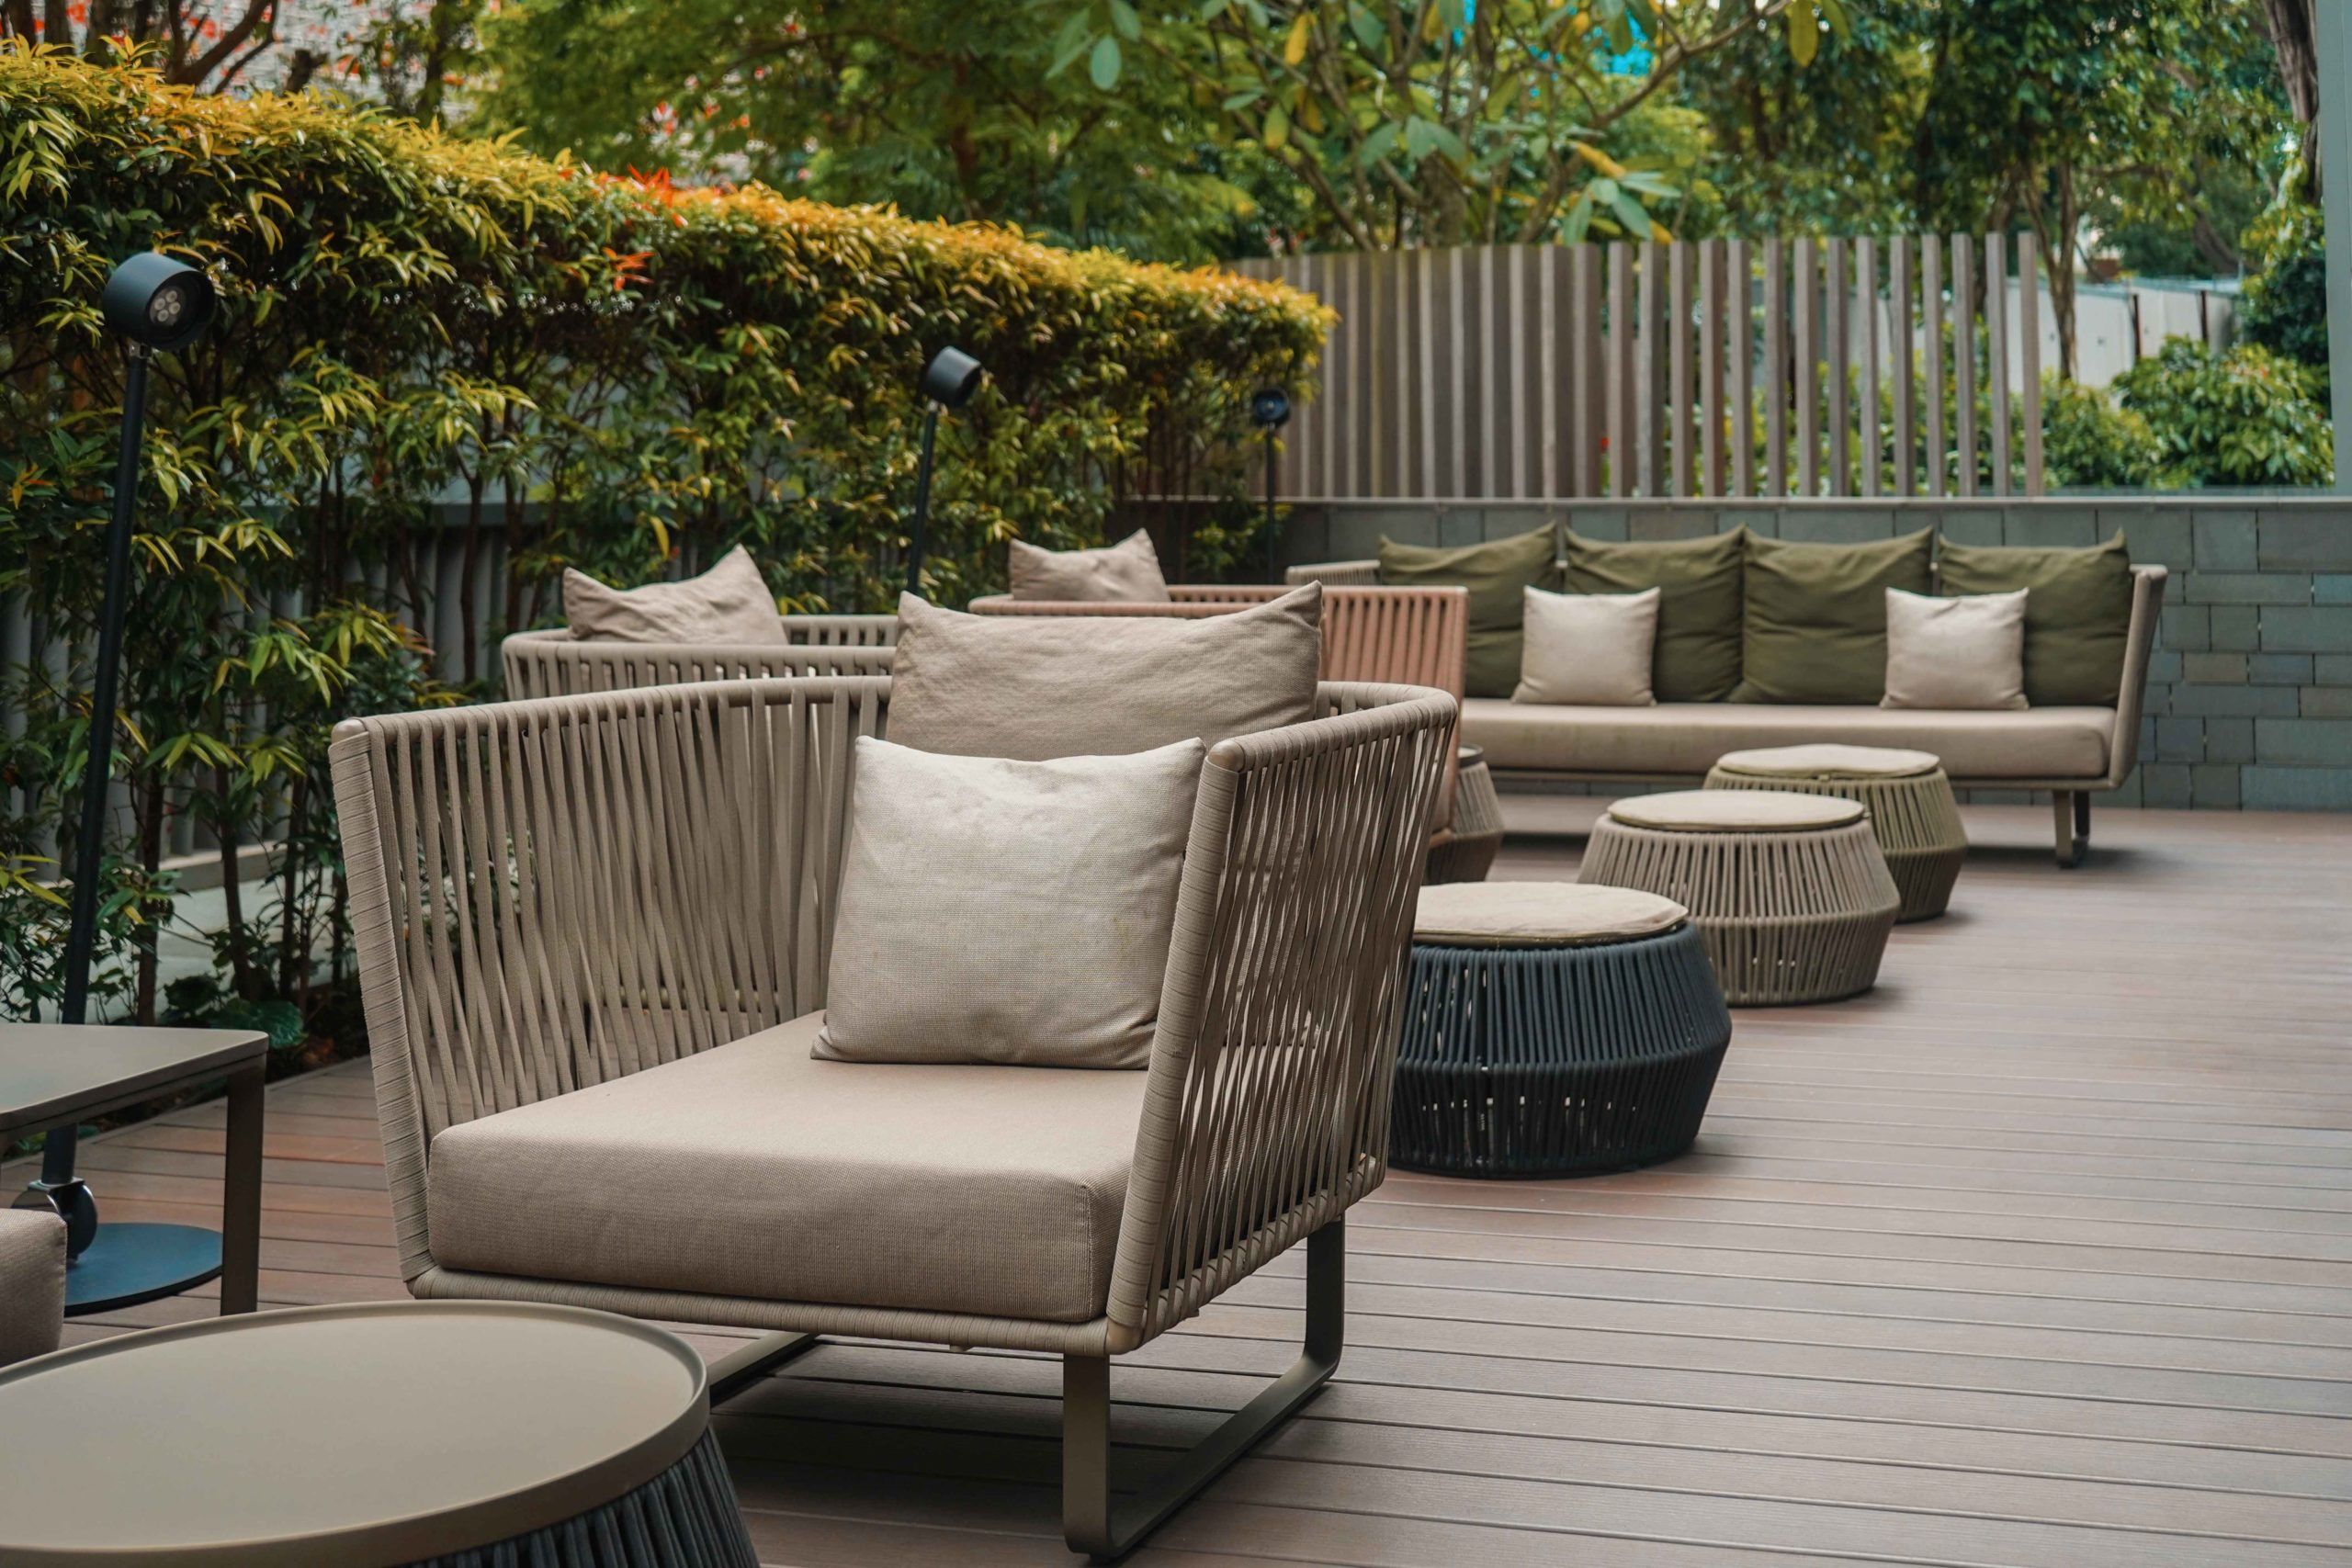 Tulou Composite Timber Decking Singapore 3 Orchard By The Park 3 scaled - 3 Orchard By-The-Park